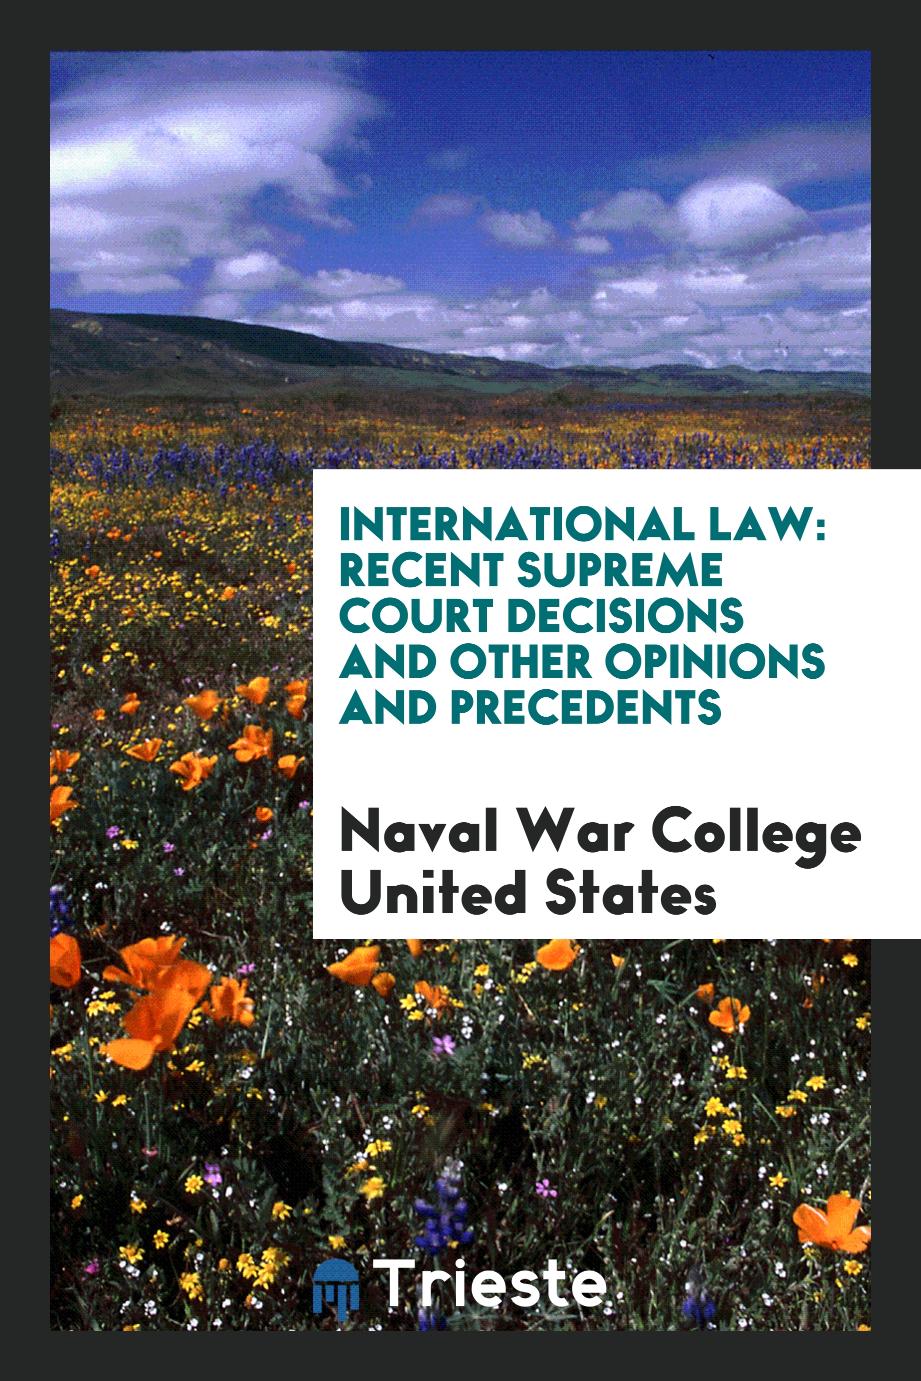 International Law: Recent Supreme Court Decisions and Other Opinions and Precedents